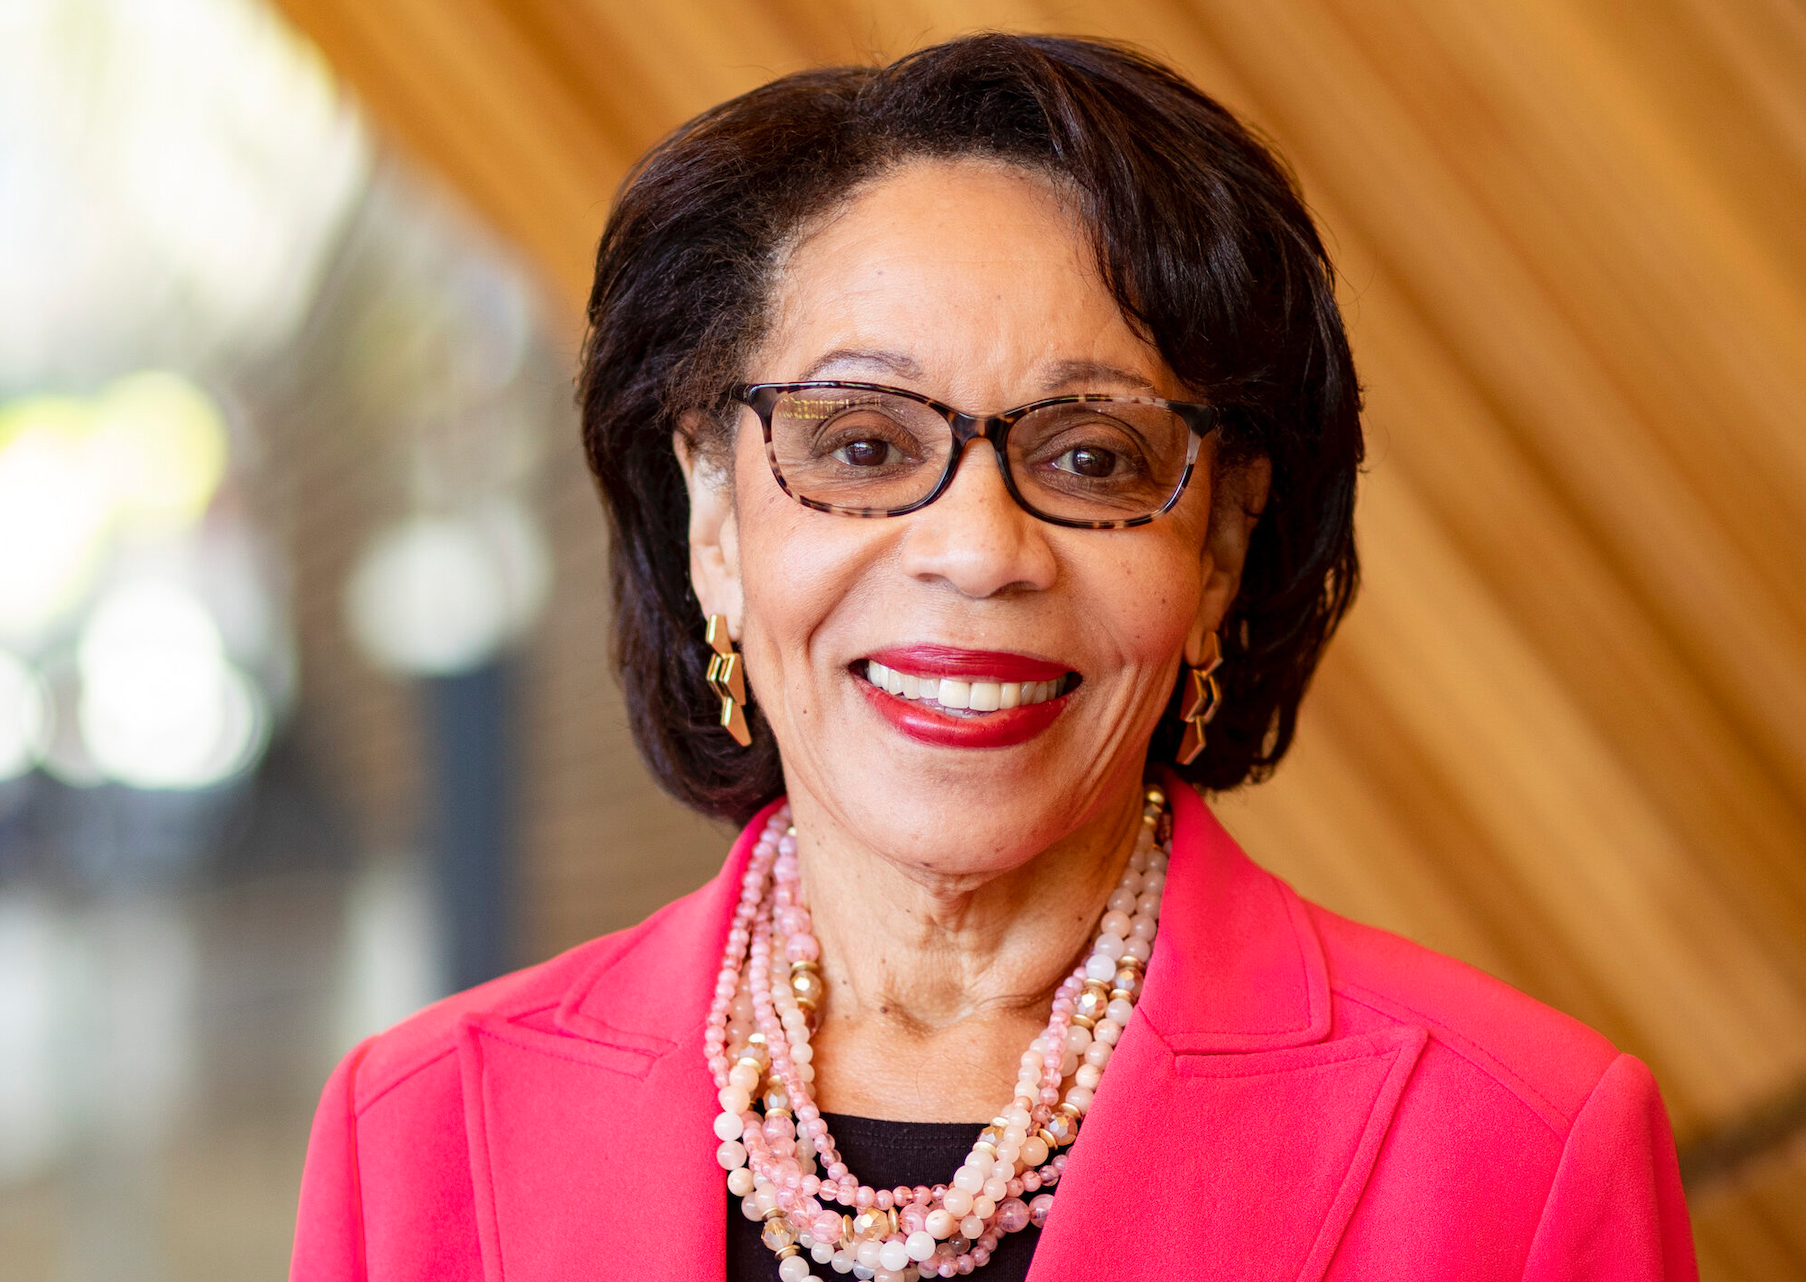 Temple University acting president JoAnne Epps has died at the age of 72 after falling ill during a service